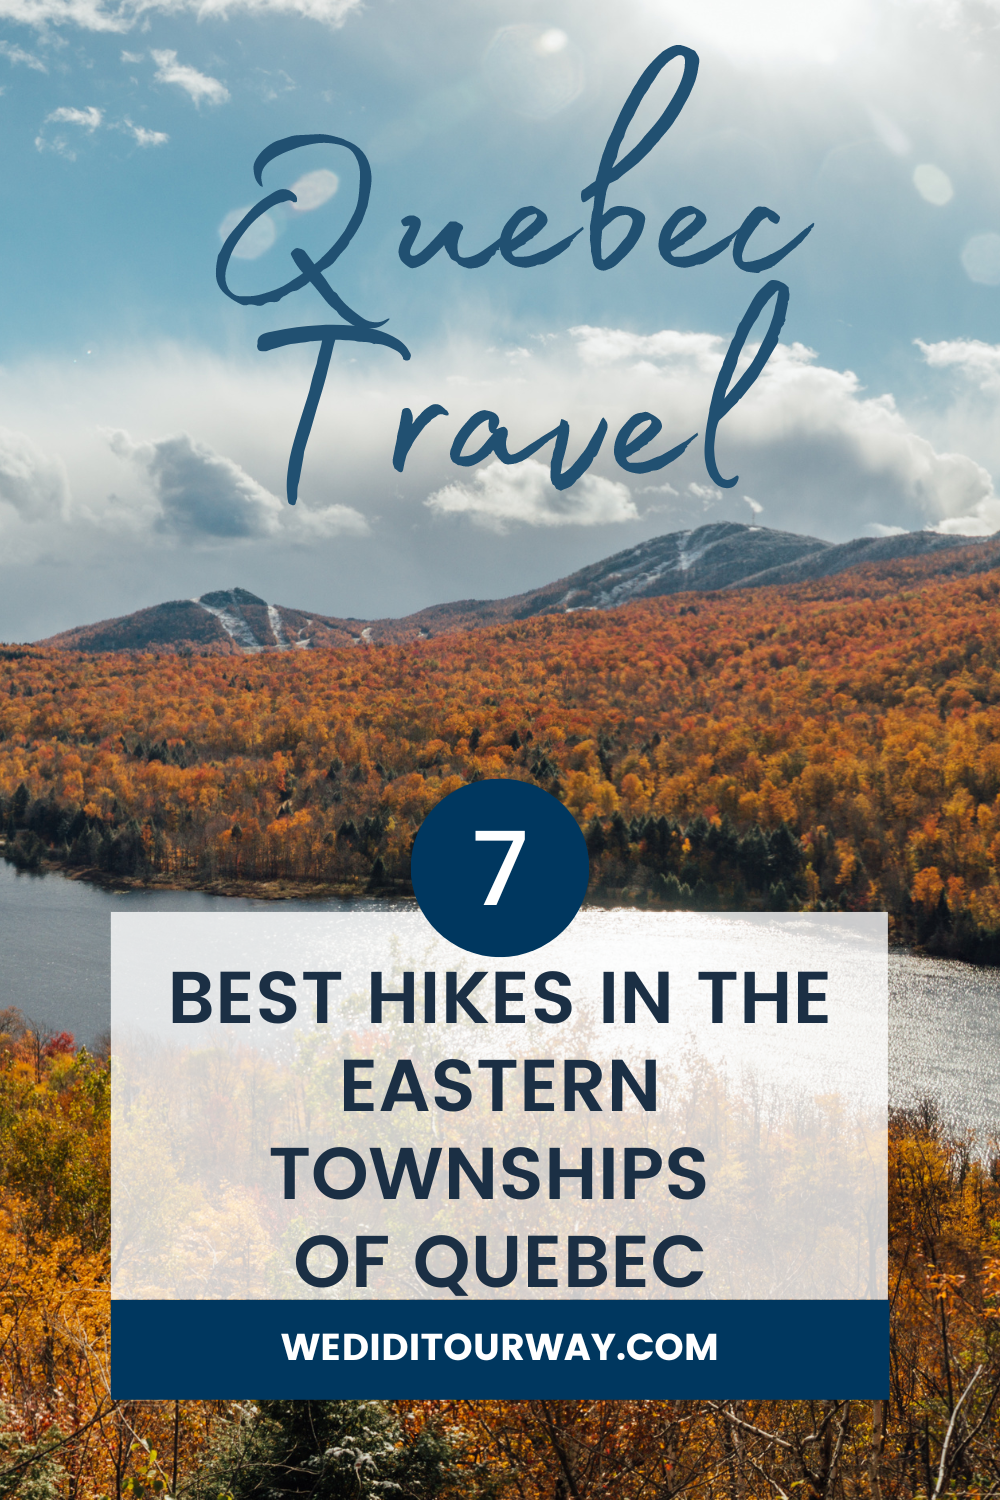 Best hikes in the Eastern Townships